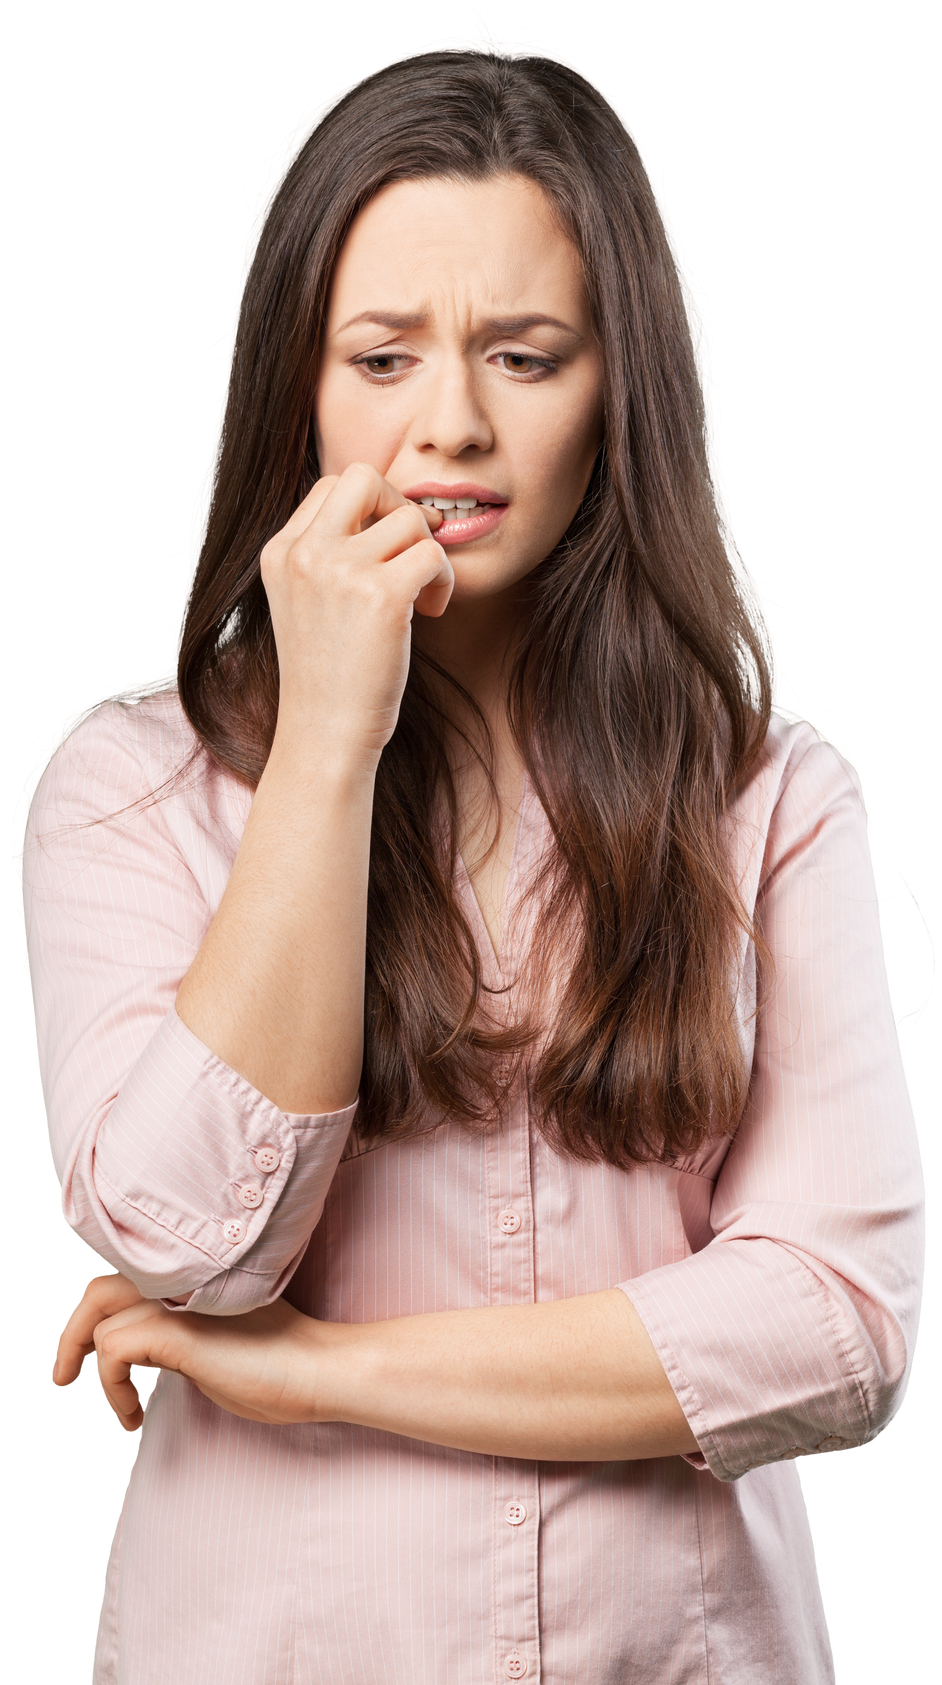 Worried Woman Biting Nails